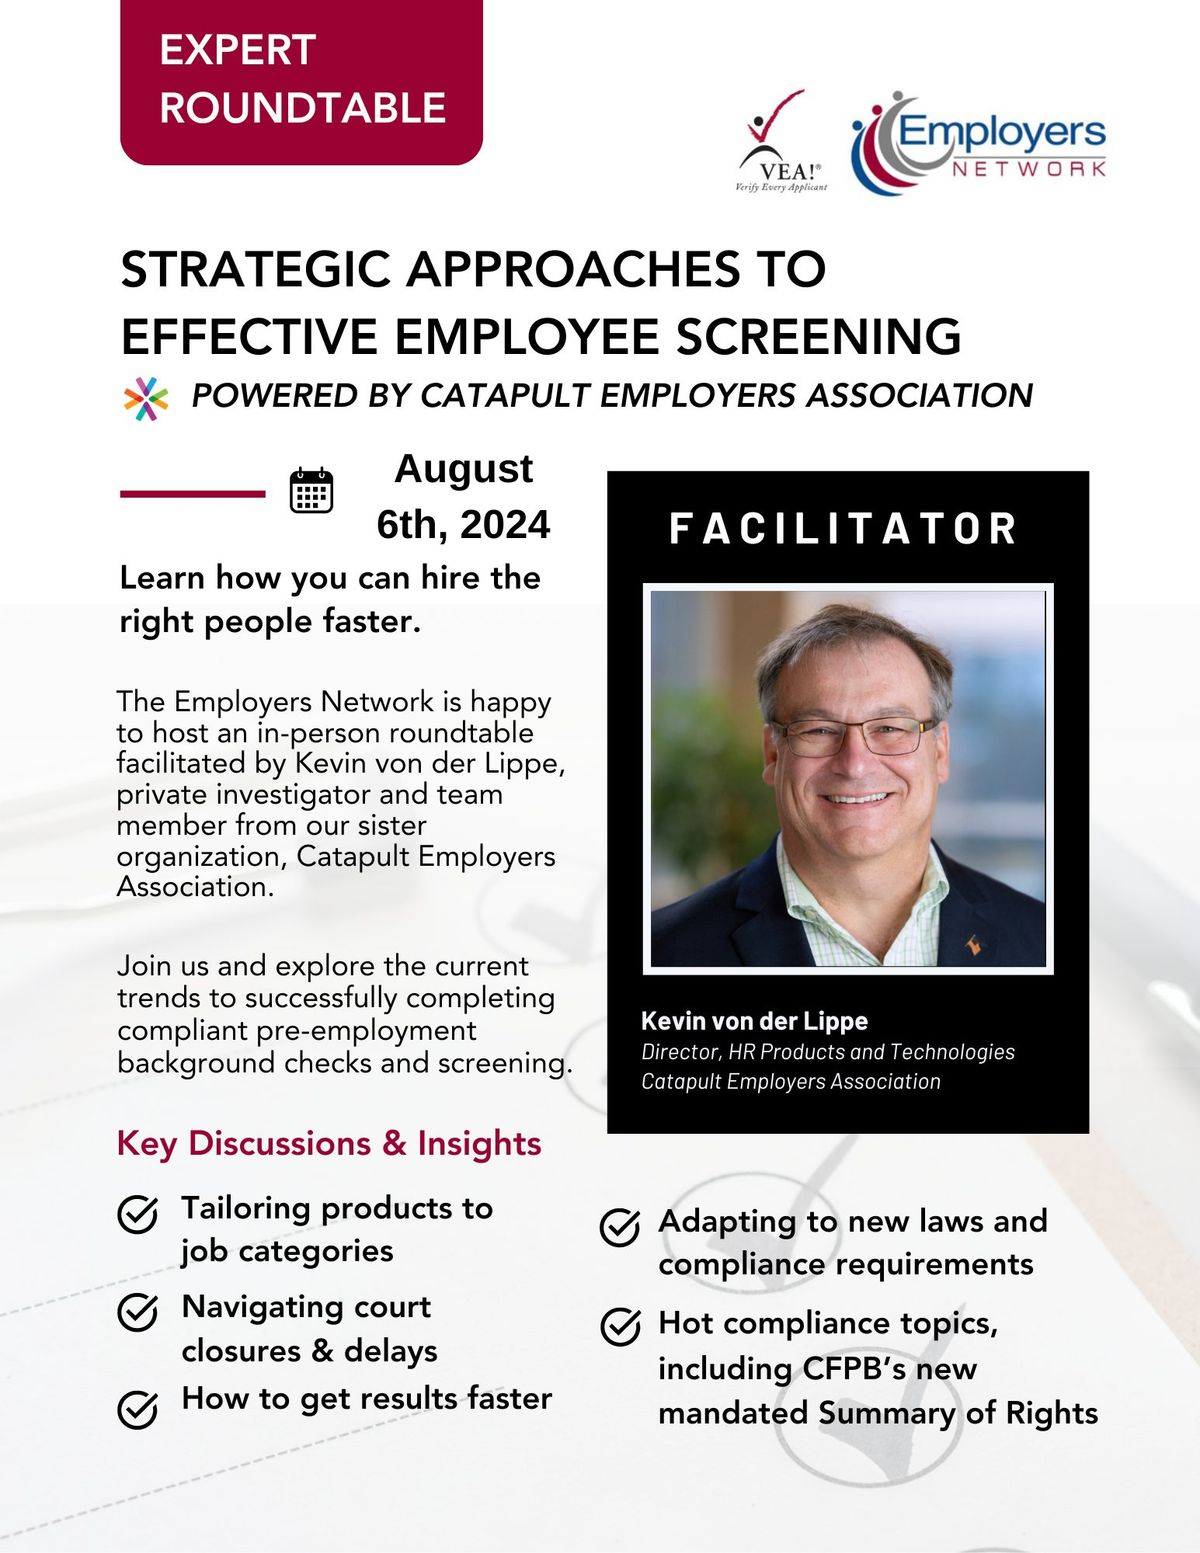 Strategic Approaches to Effective Employee Screening